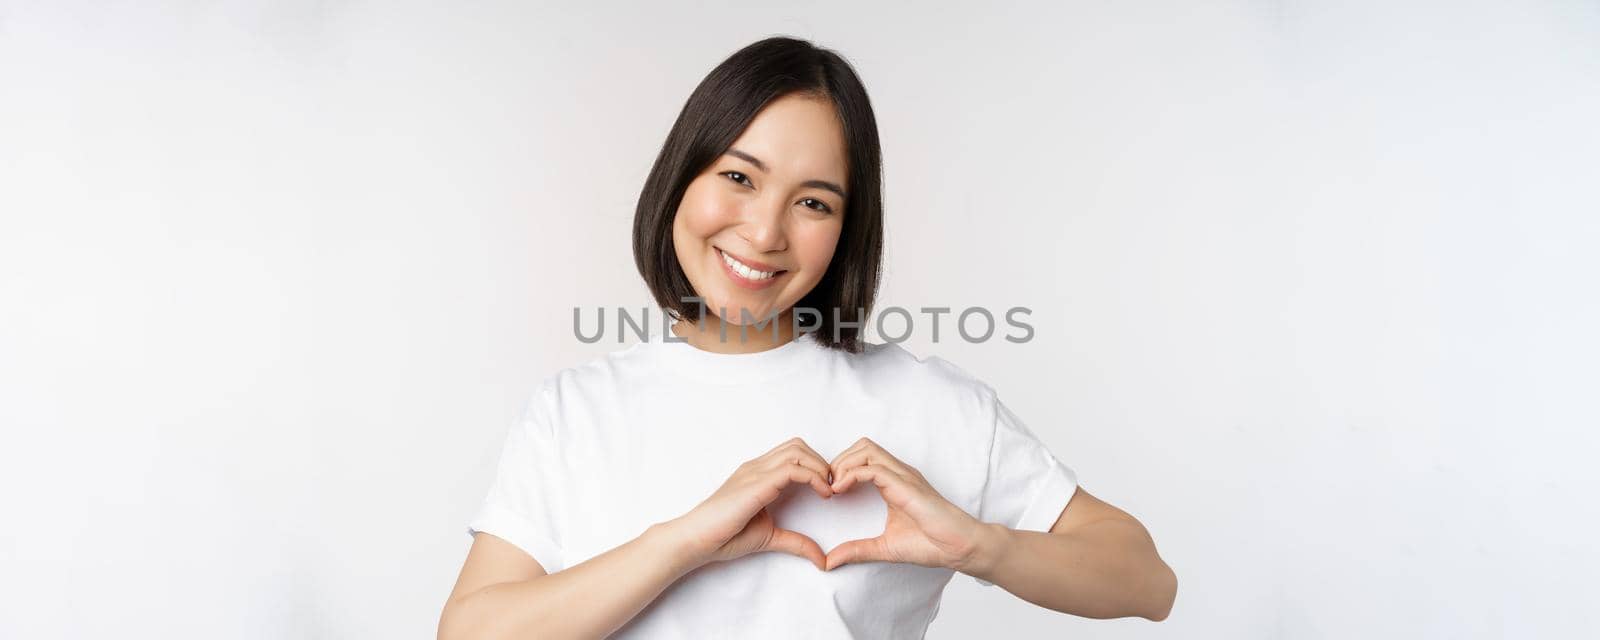 Lovely asian woman smiling, showing heart sign, express tenderness and affection, standing over white background.